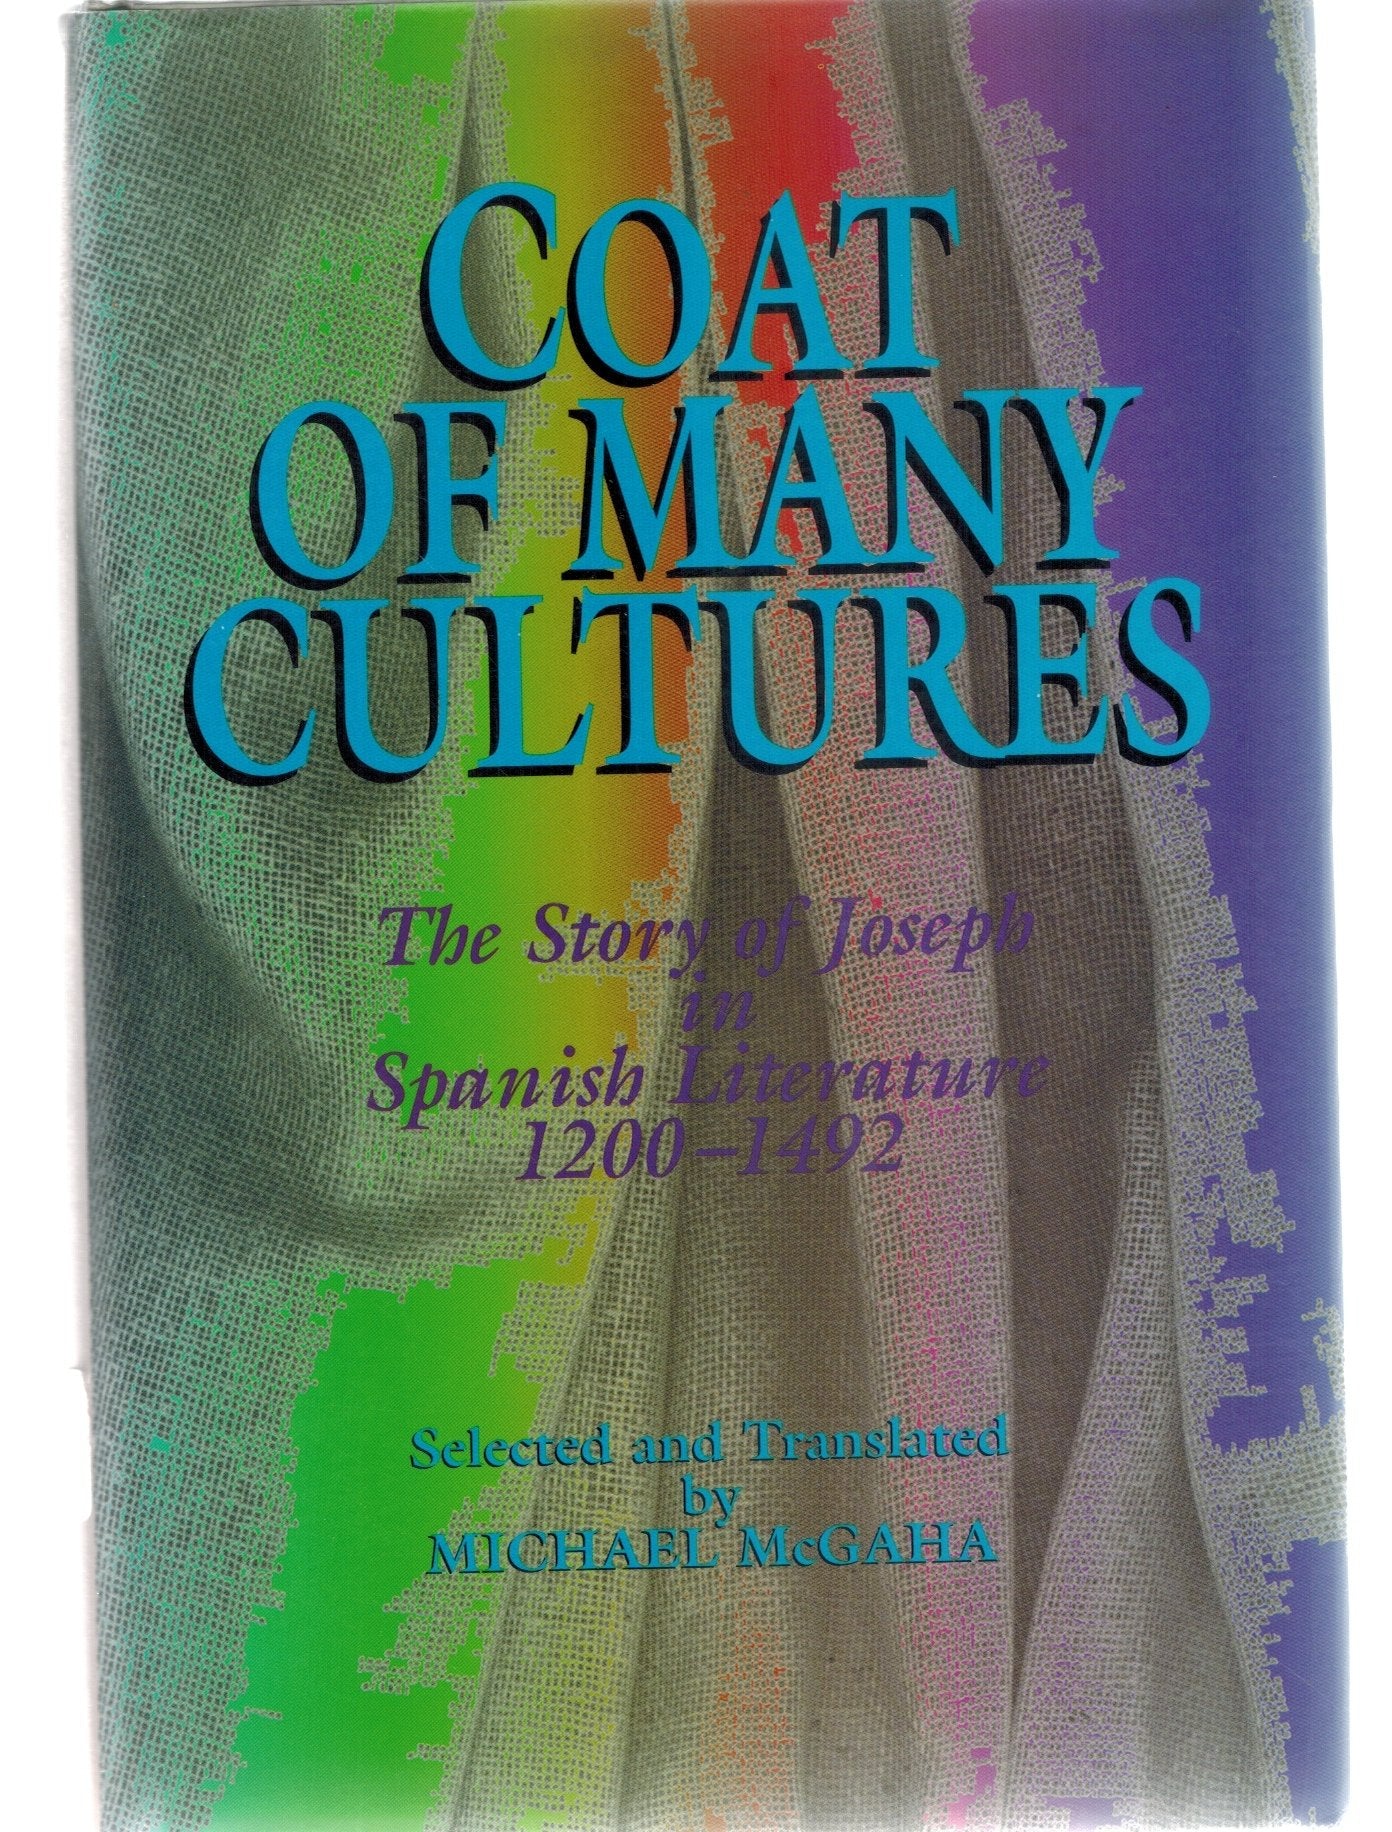 COAT OF MANY CULTURES The Story of Joseph in Spanish Literature 1200-1492  by McGaha, Michael D.